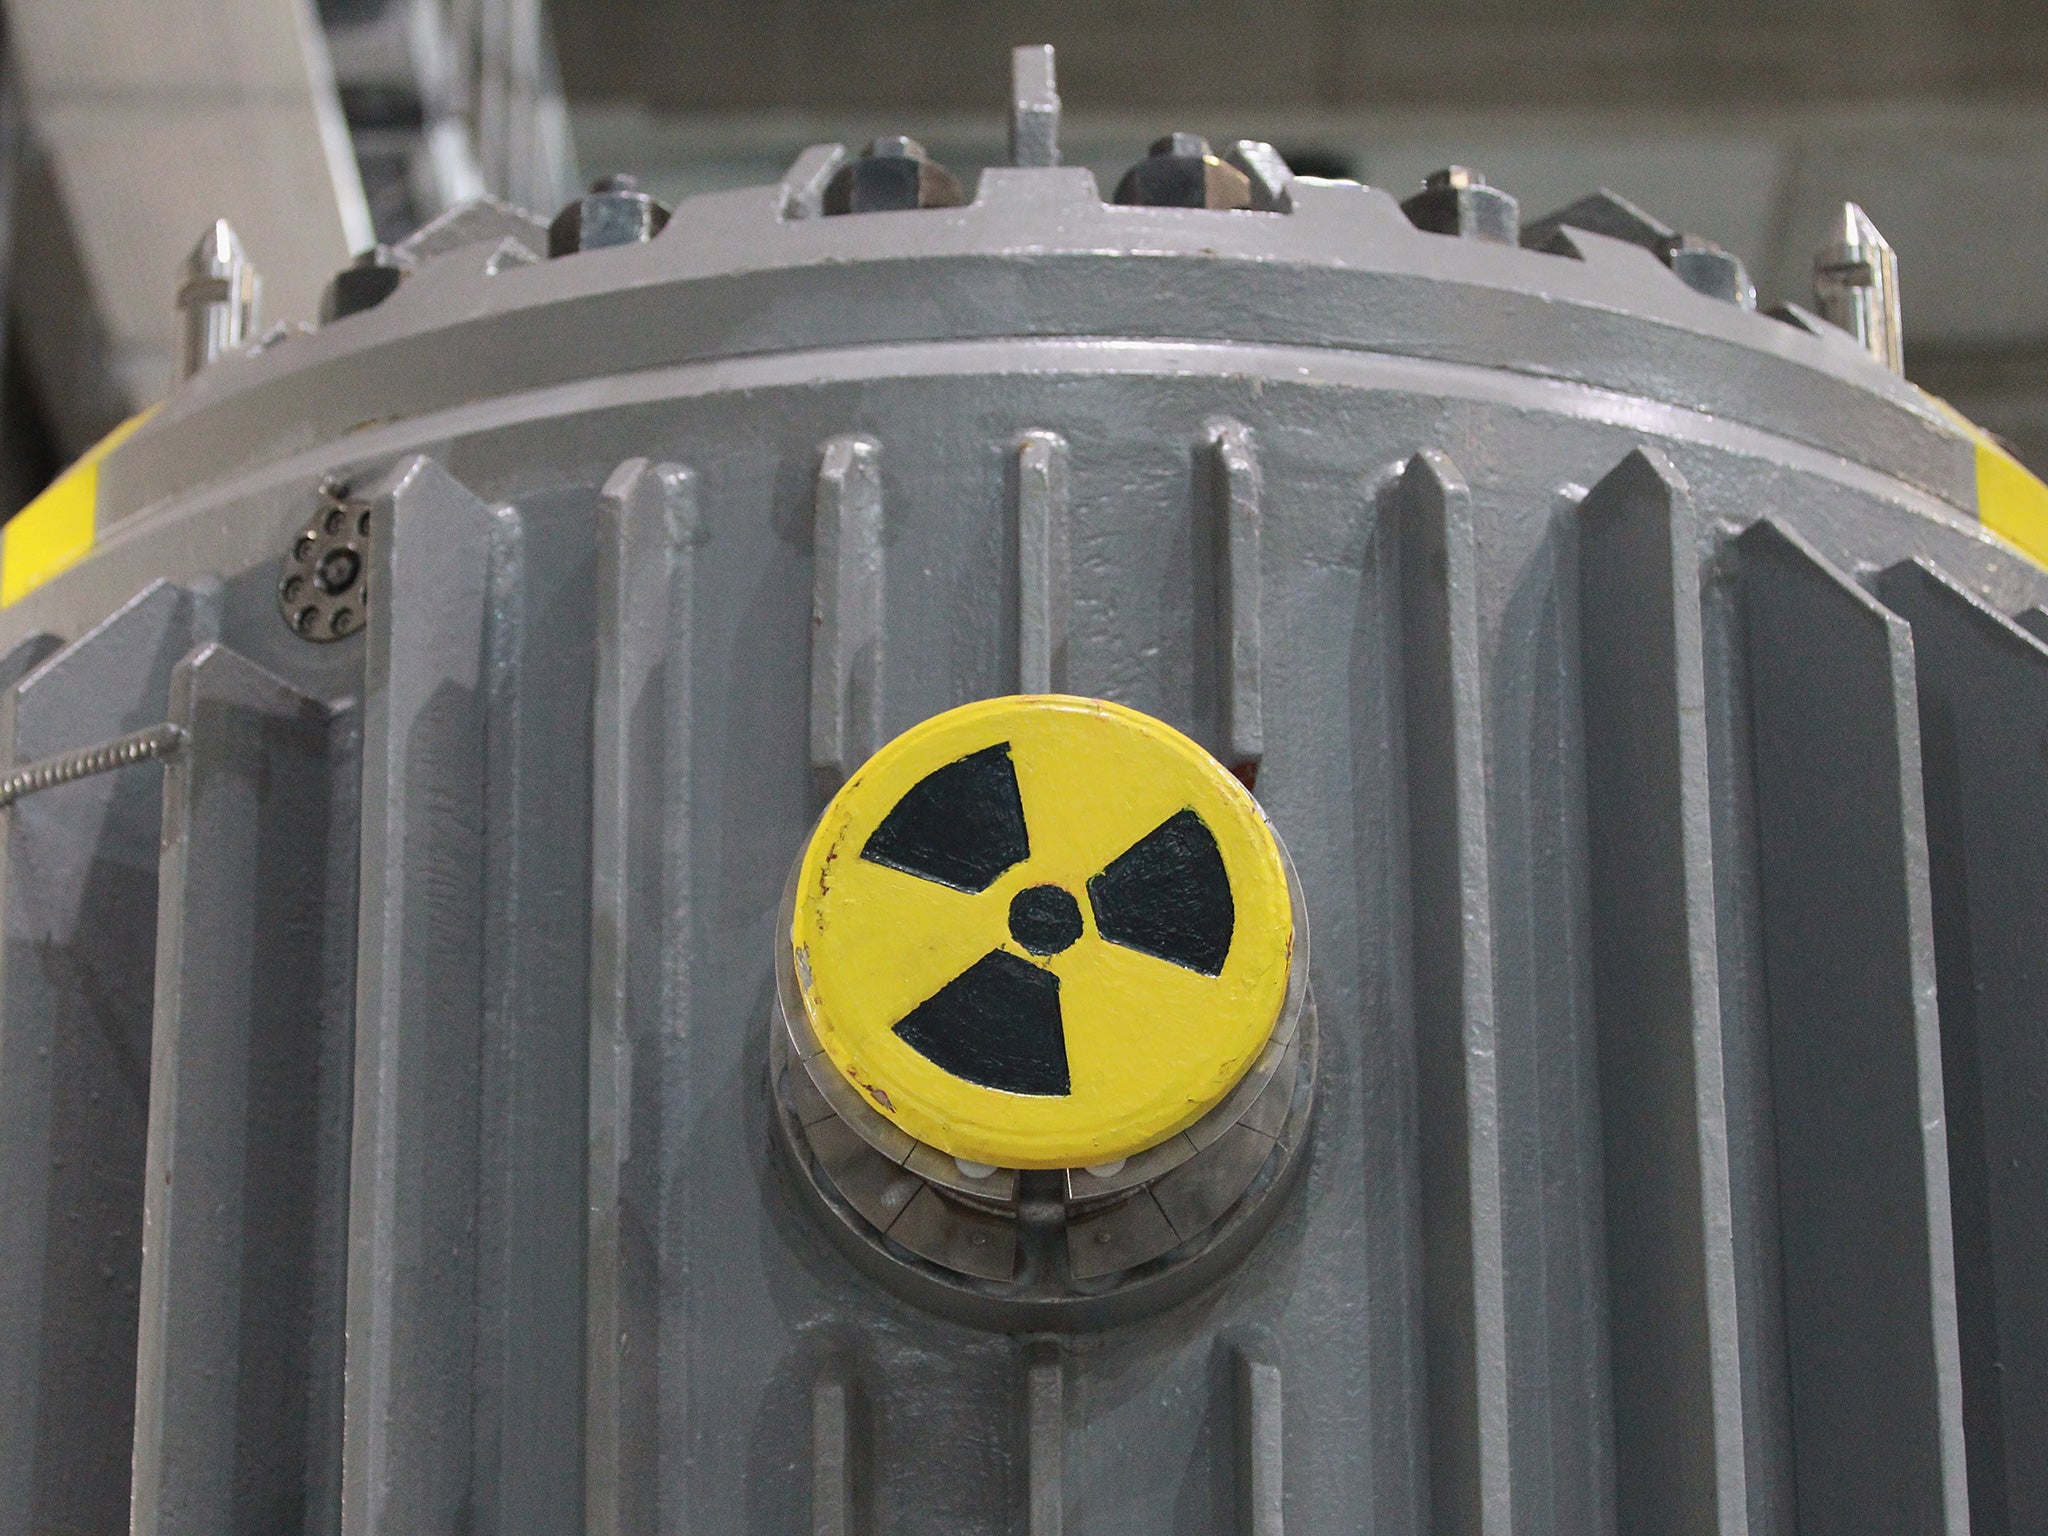 The Conservatives may have to start considering their very own nuclear option